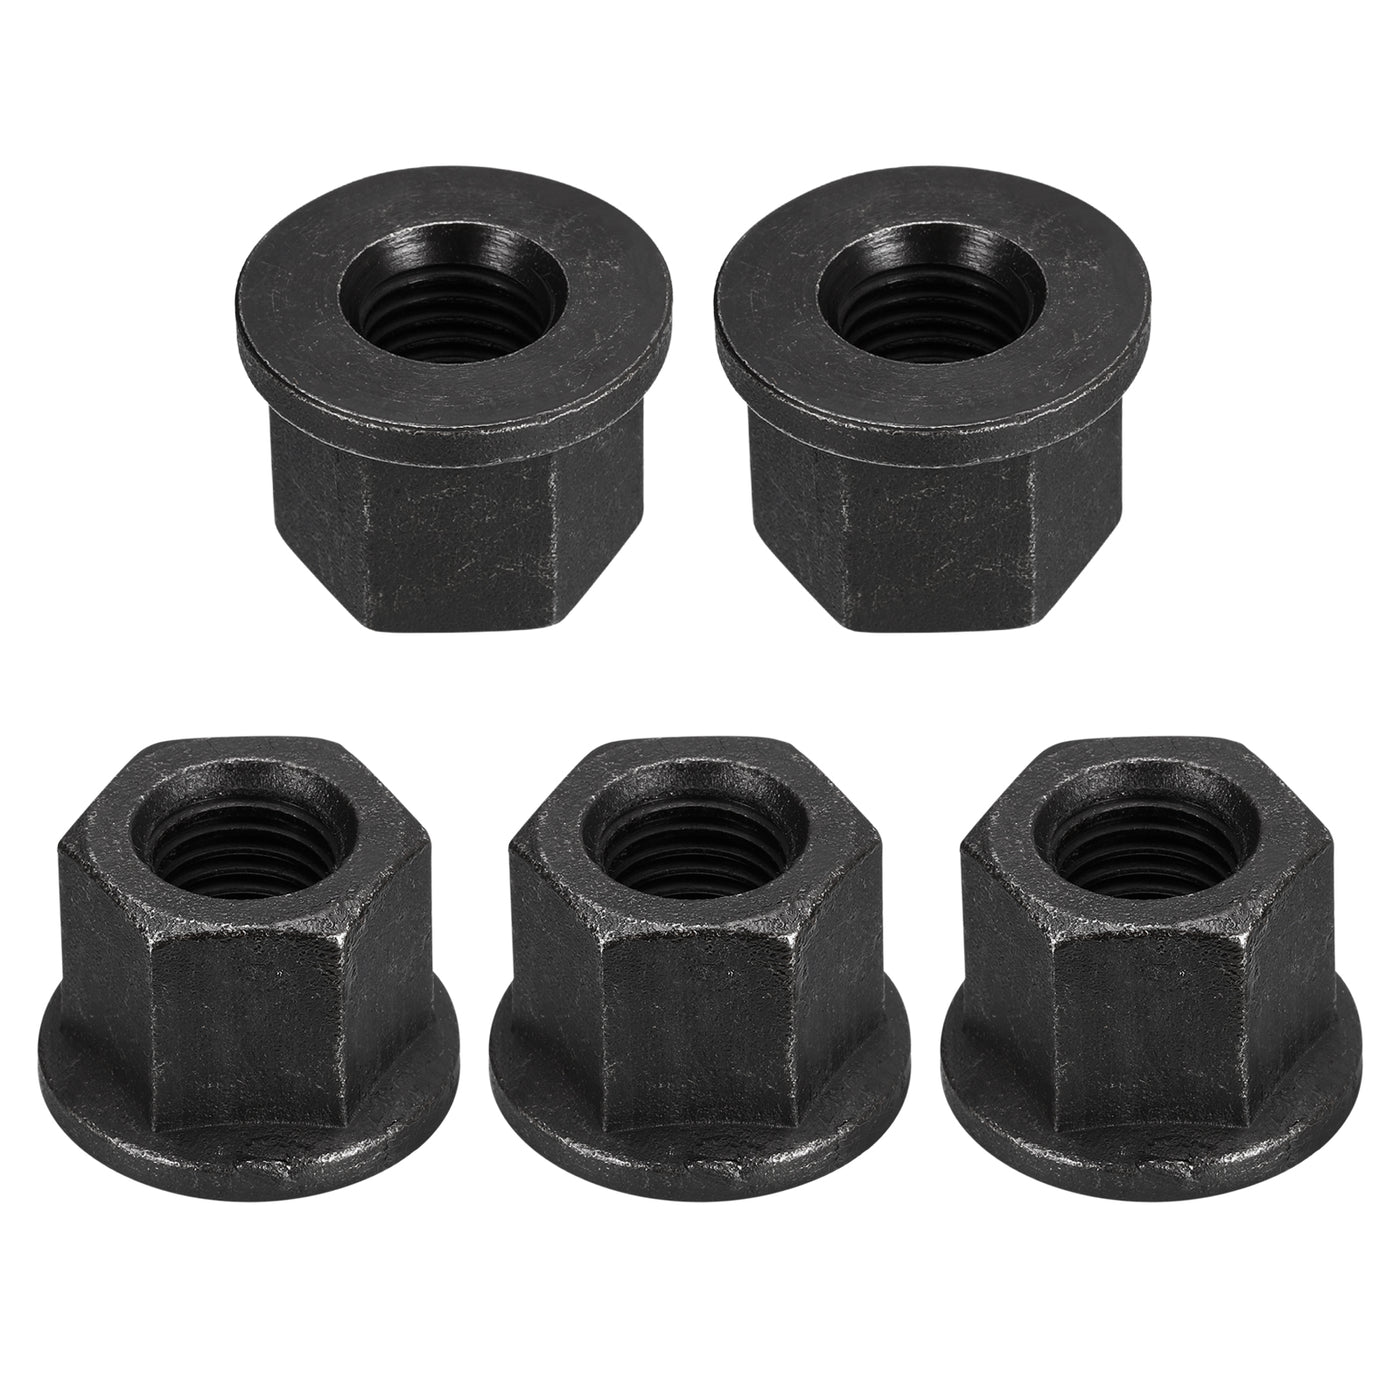 uxcell Uxcell M16 Flange Hex Lock Nuts, 5pcs Grade 8.8 Carbon Steel Hex Flange Nuts